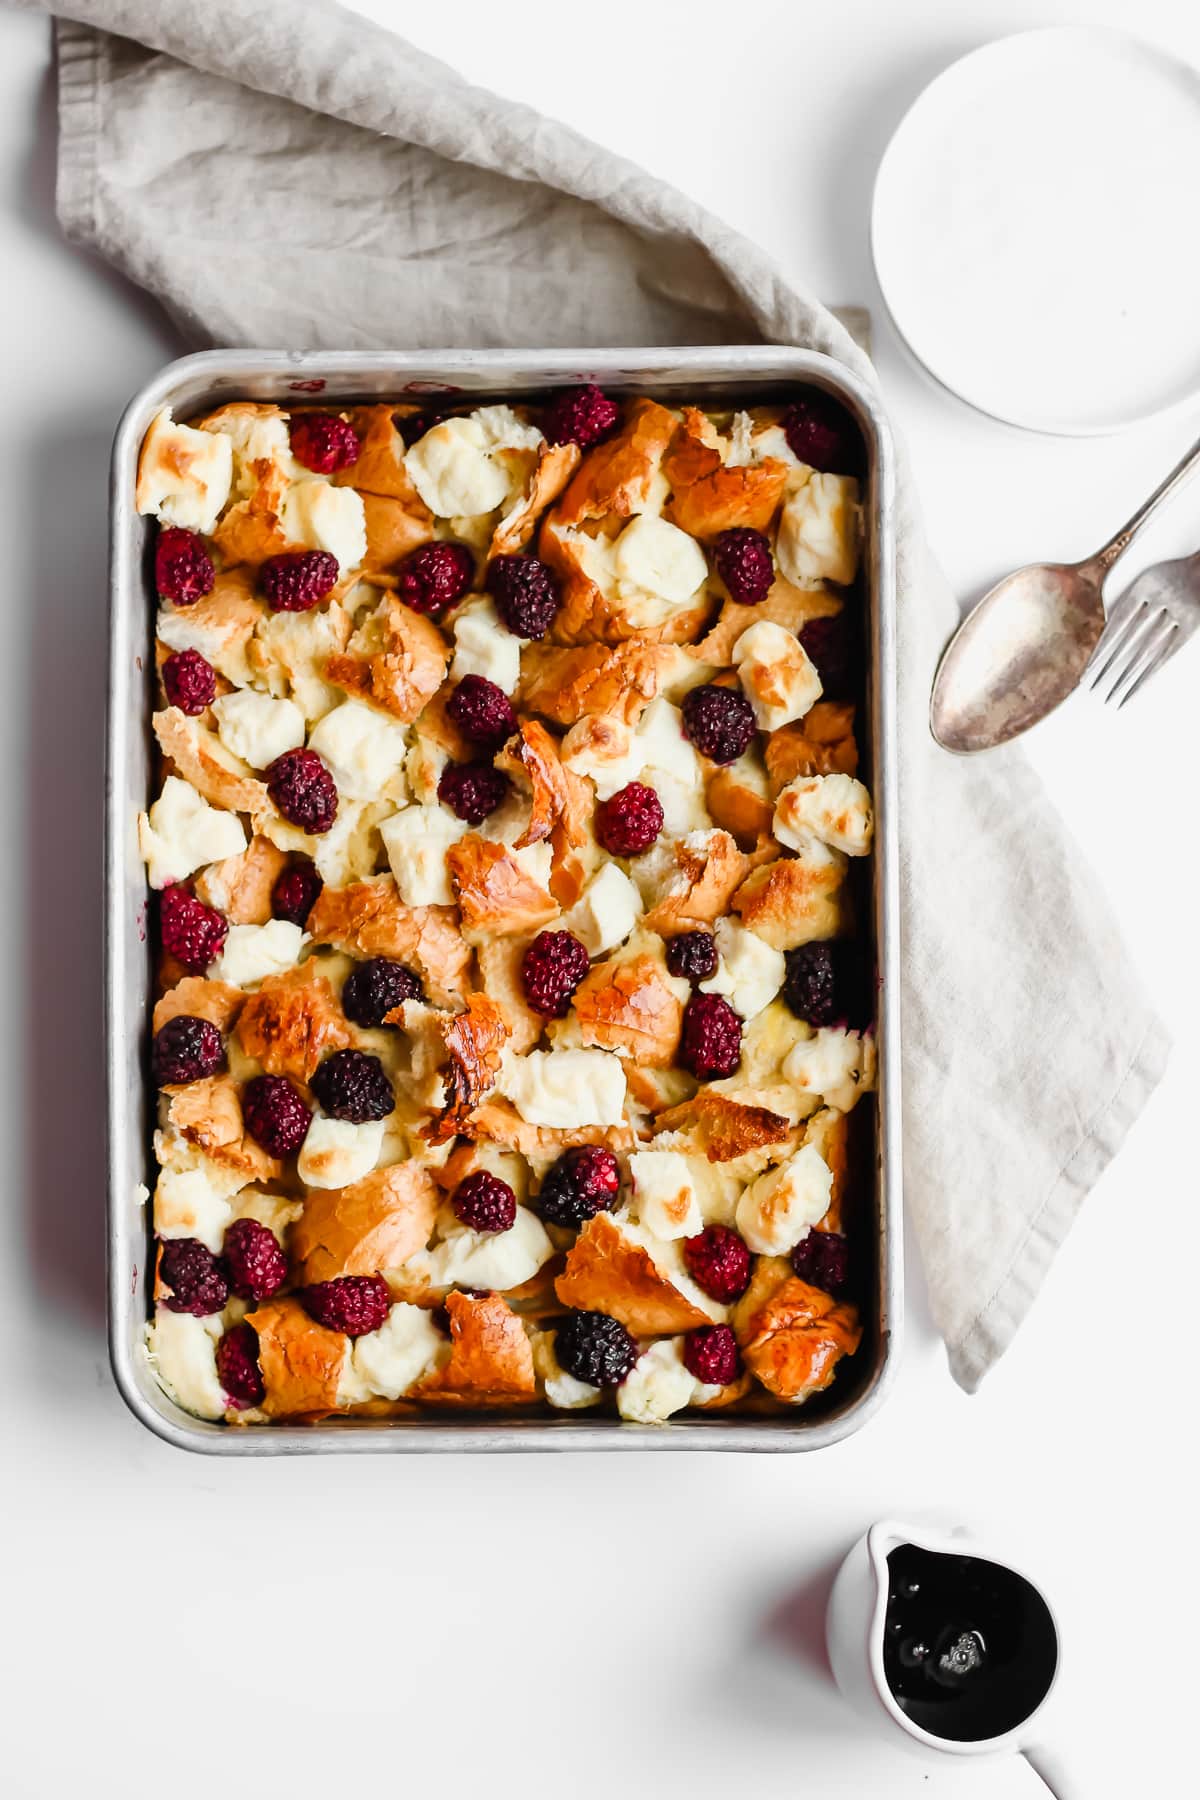 Pan of french toast bake.